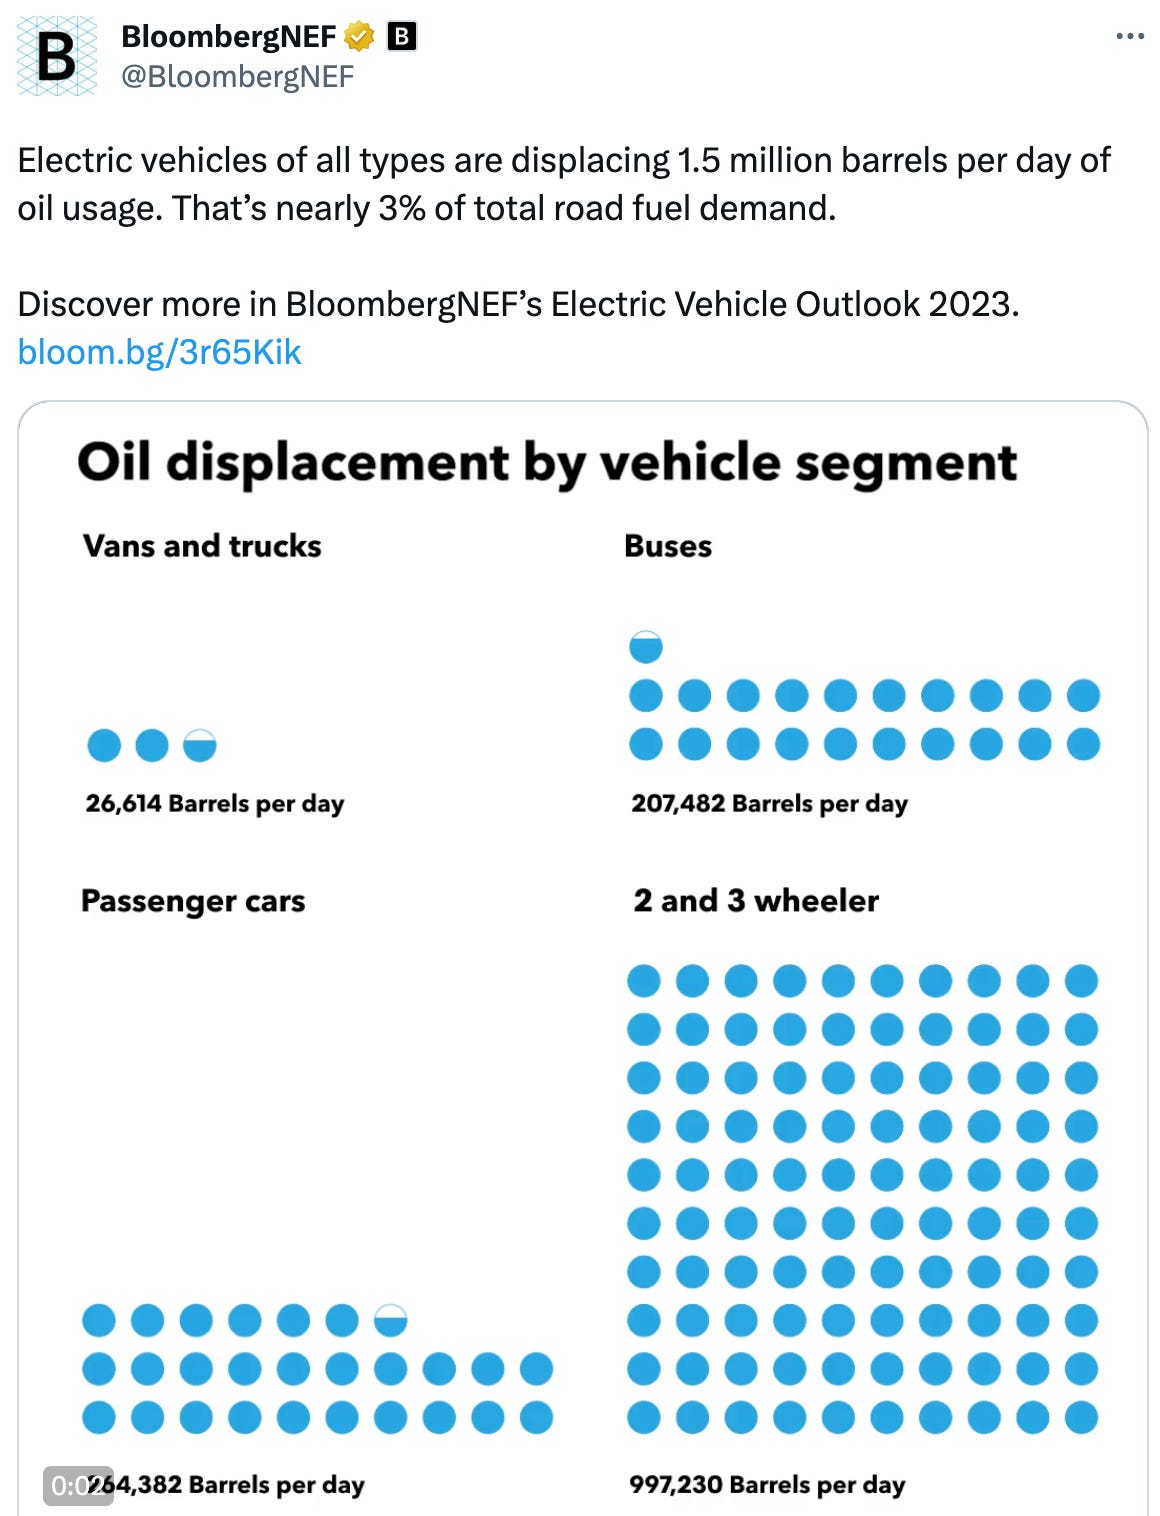  See new posts Conversation BloombergNEF  @BloombergNEF Electric vehicles of all types are displacing 1.5 million barrels per day of oil usage. That’s nearly 3% of total road fuel demand.   Discover more in BloombergNEF’s Electric Vehicle Outlook 2023. https://bloom.bg/3r65Kik